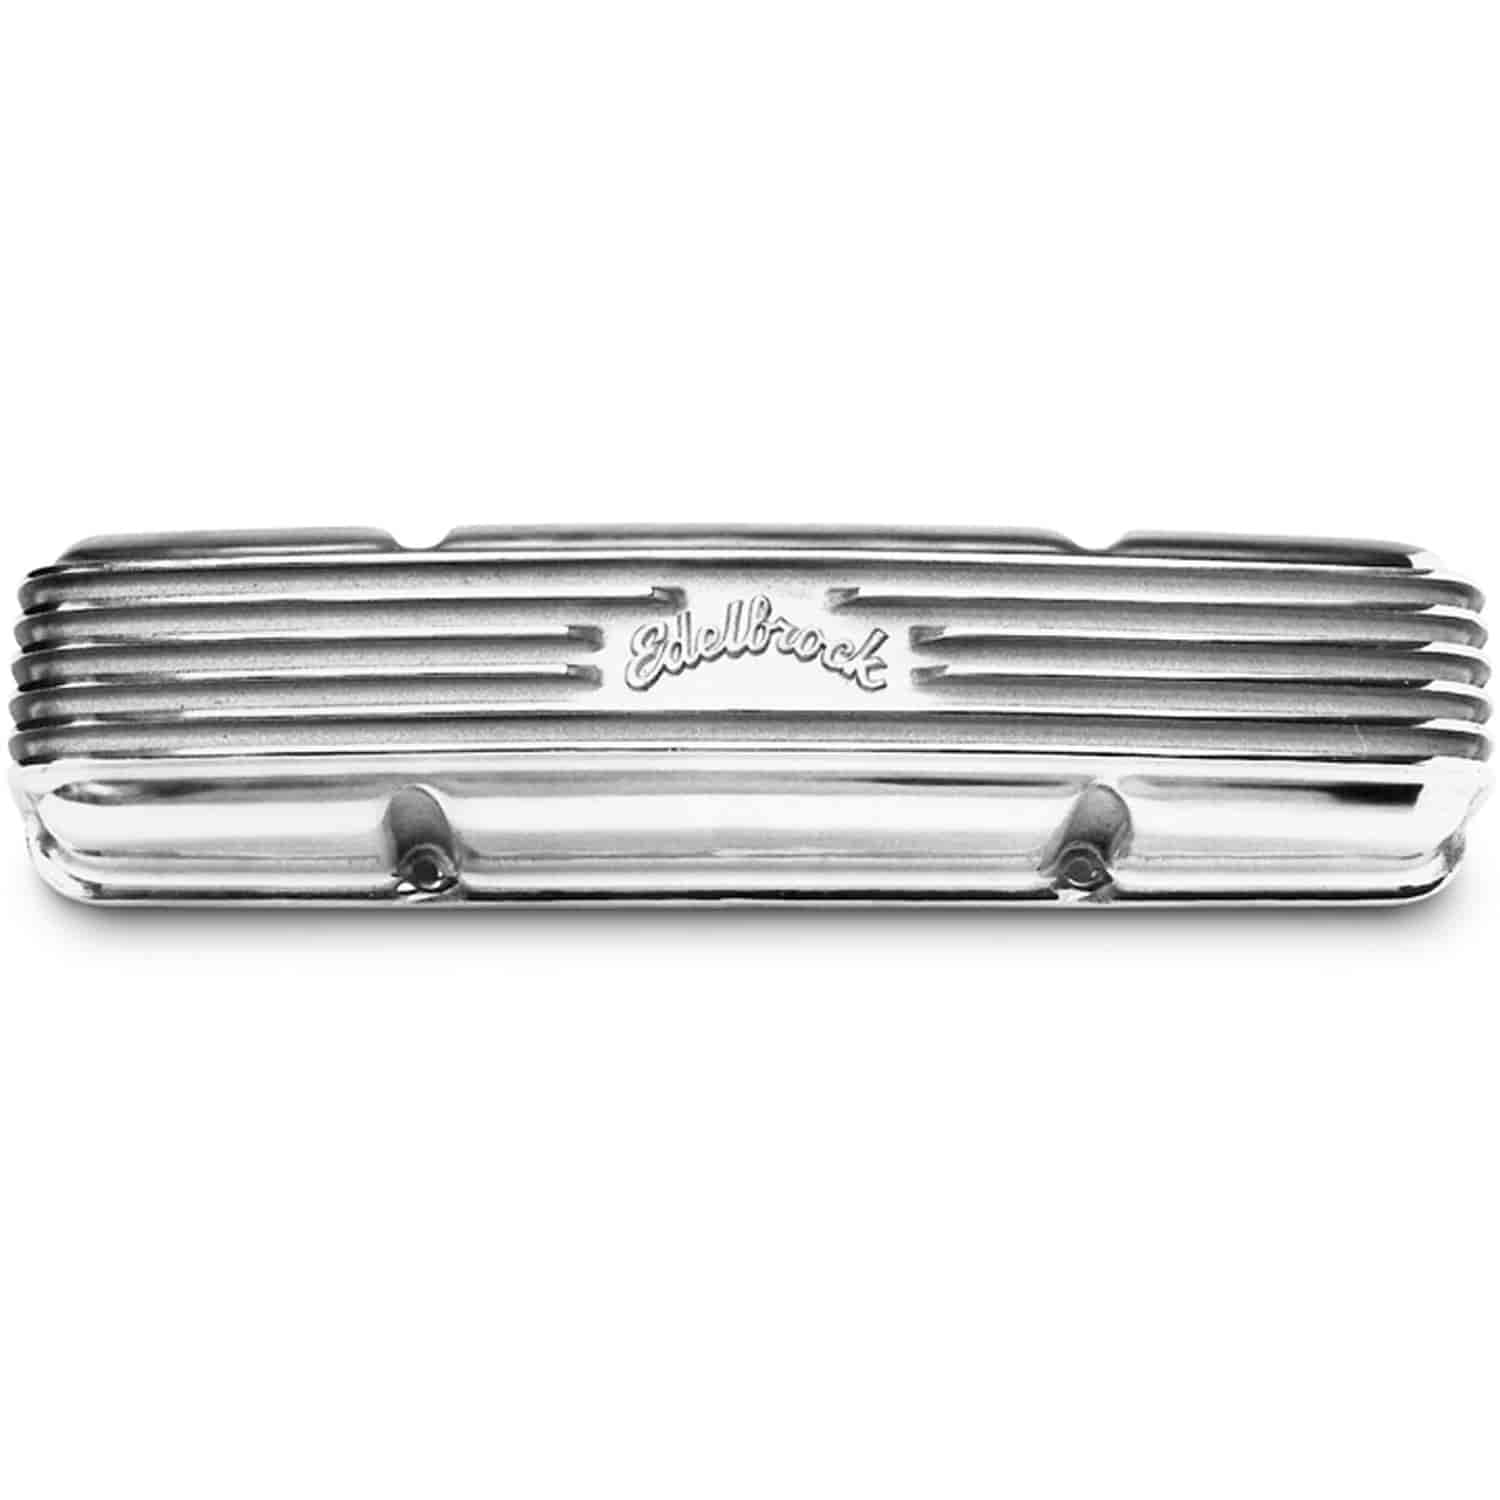 Classic Finned Valve Covers for 1959-1986 Small Block Chevy 262-400 with Polished Finish